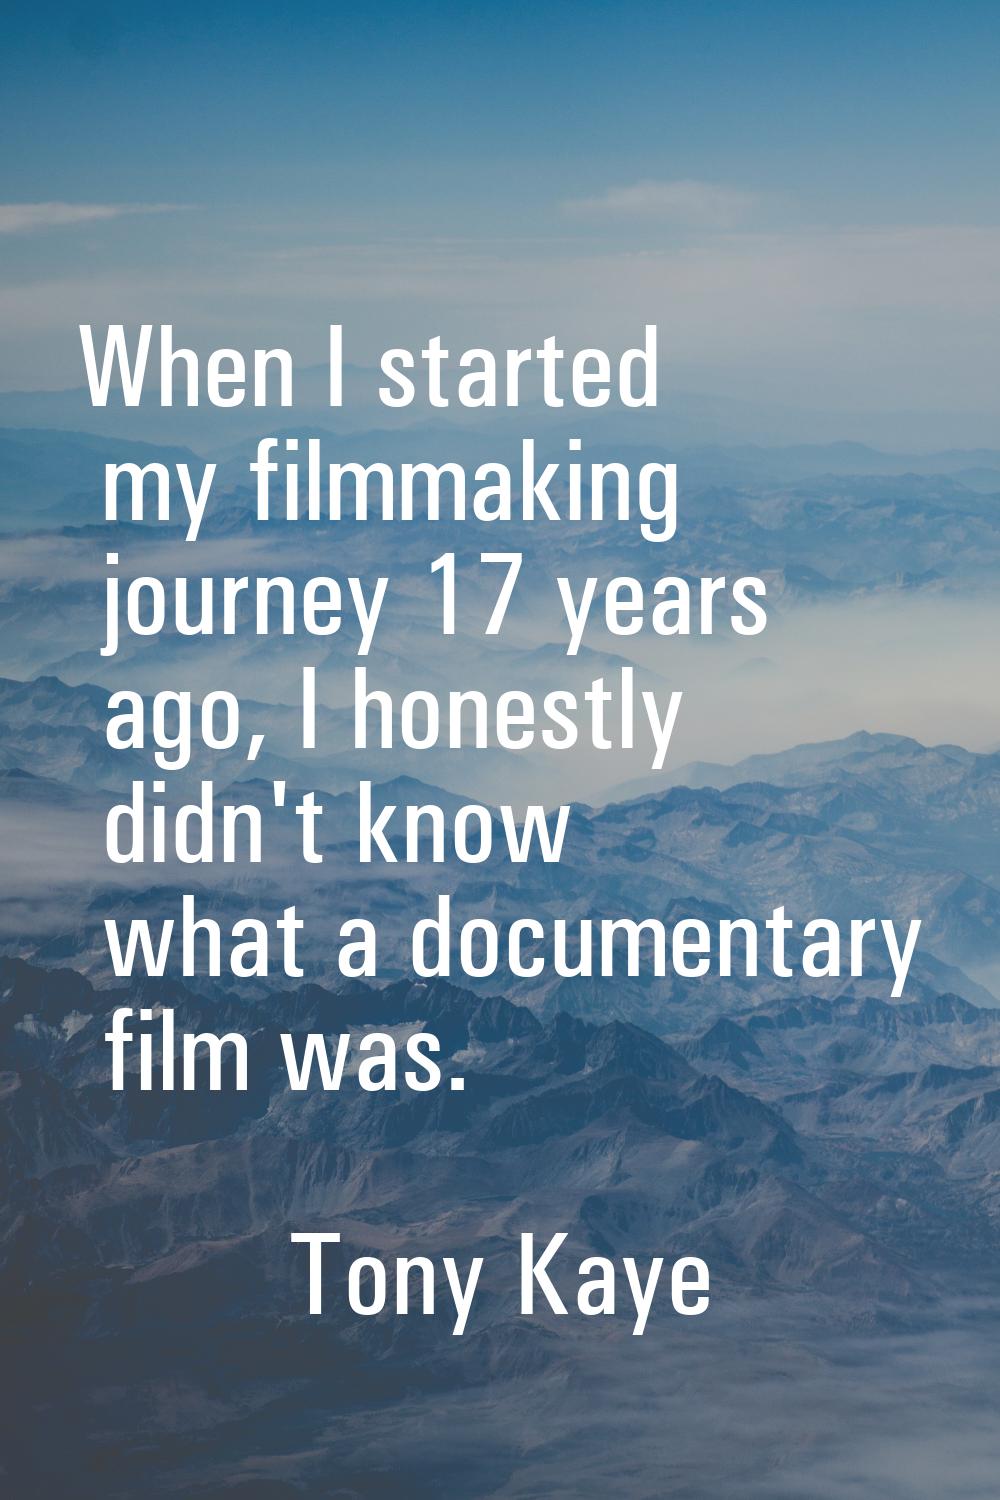 When I started my filmmaking journey 17 years ago, I honestly didn't know what a documentary film w